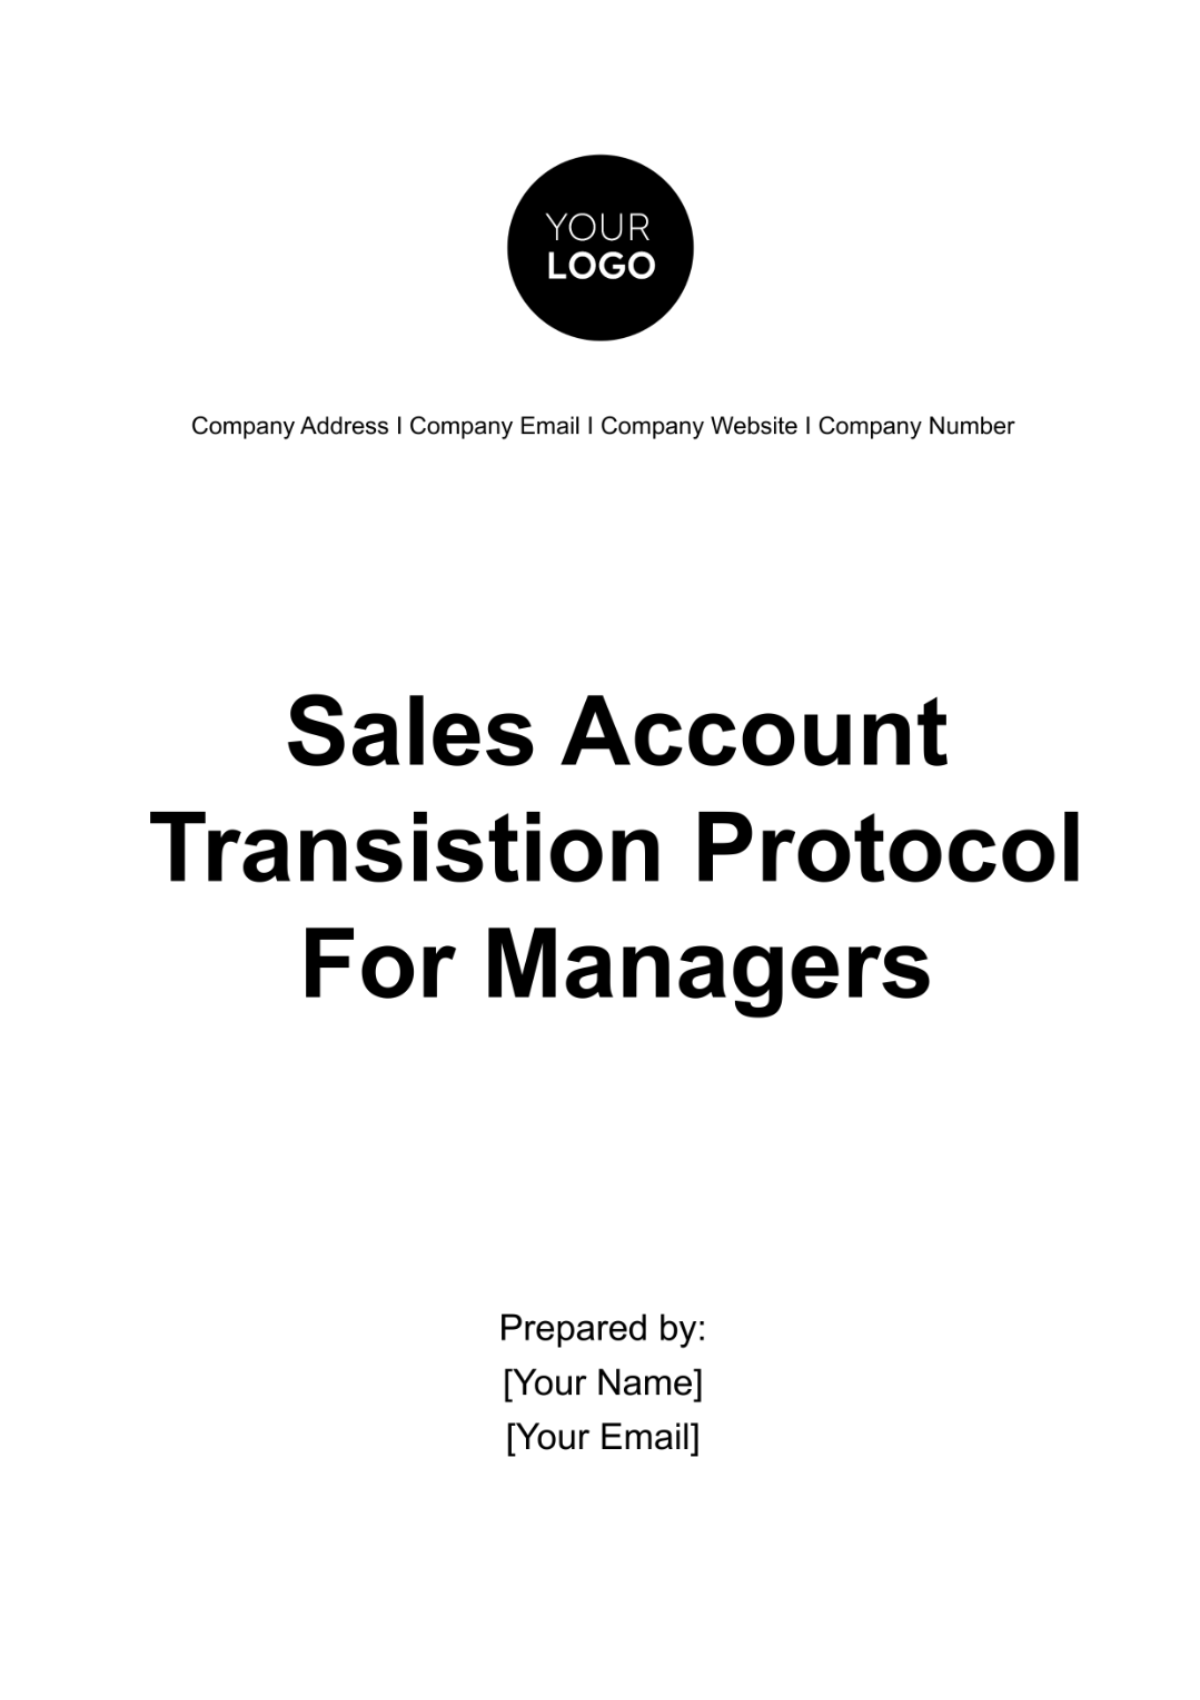 Sales Account Transition Protocol for Managers Template